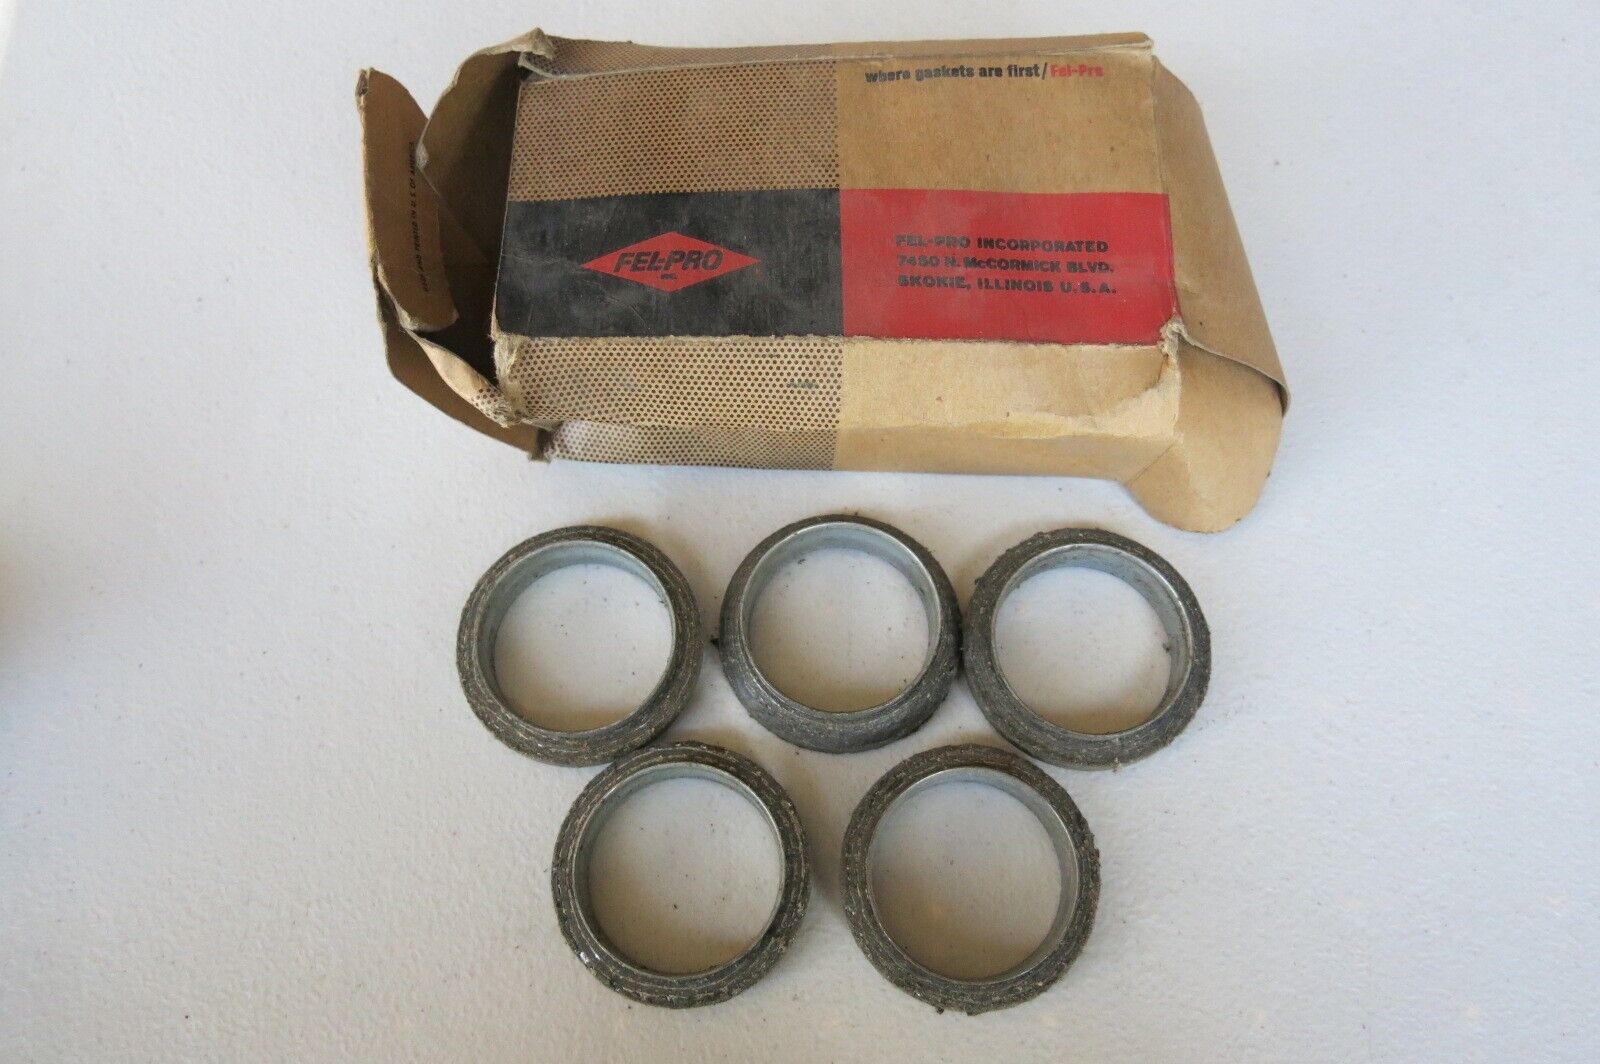 Vintage Fel-Pro 9985 Exhaust Pipe to Manifold Lot of 5 fits Rambler Olds '64-'71